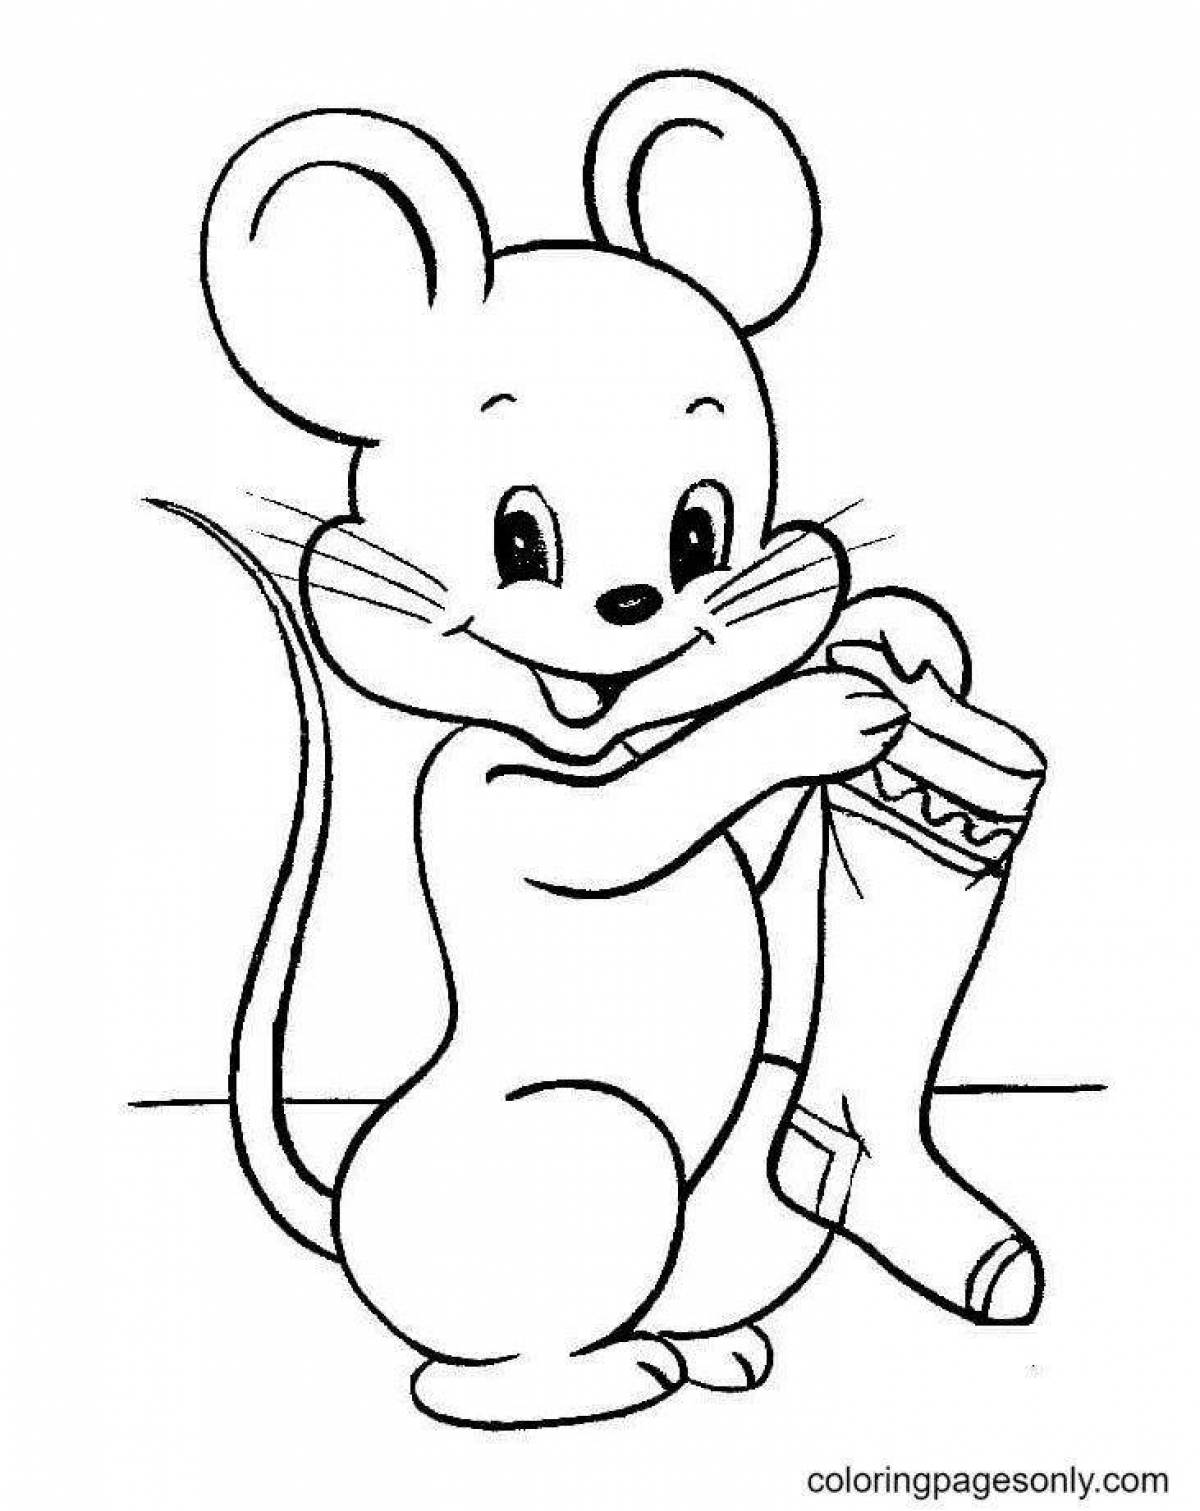 For kids mouse 3 4 years old #6